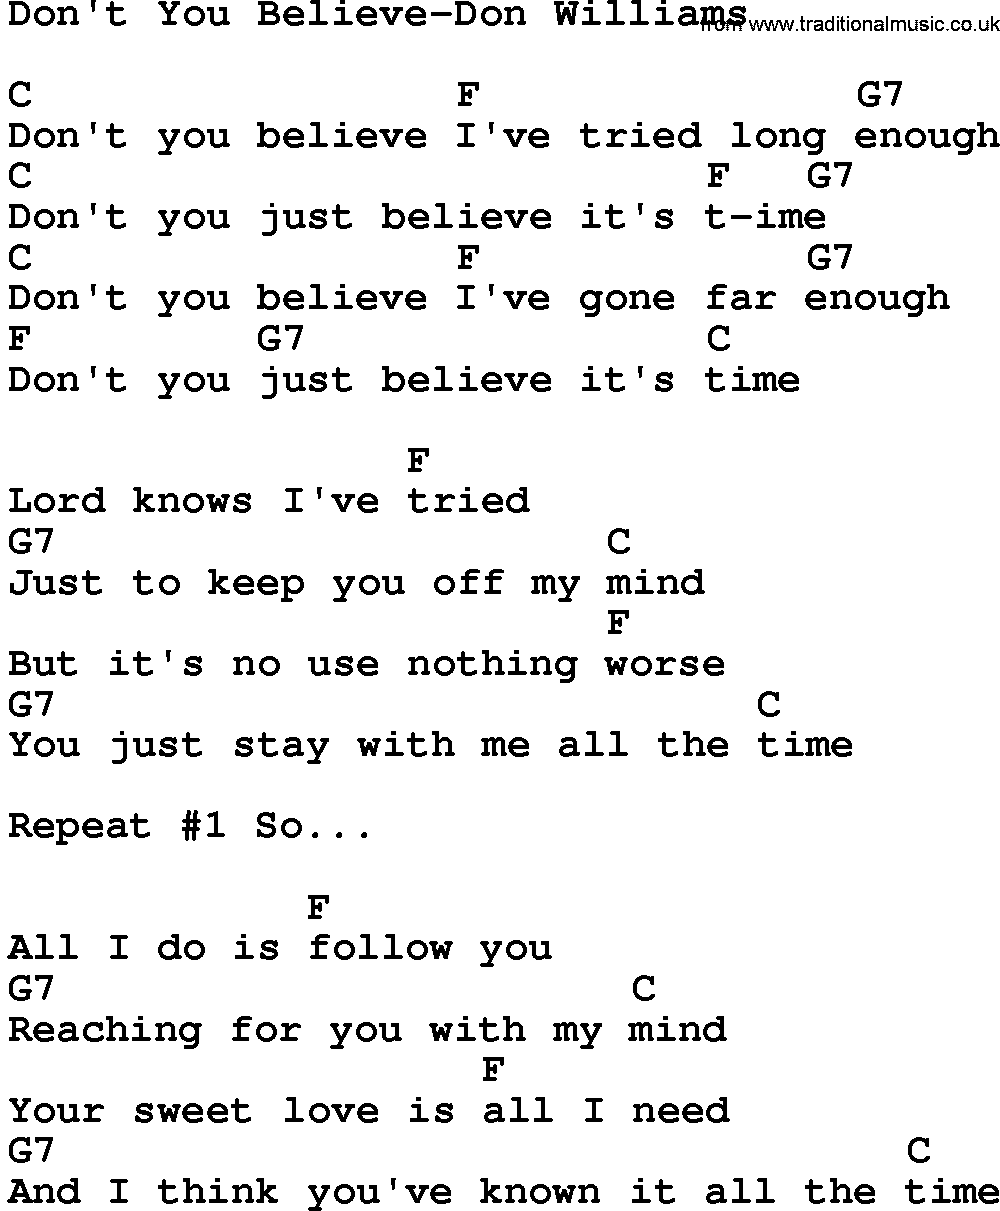 Country music song: Don't You Believe-Don Williams lyrics and chords